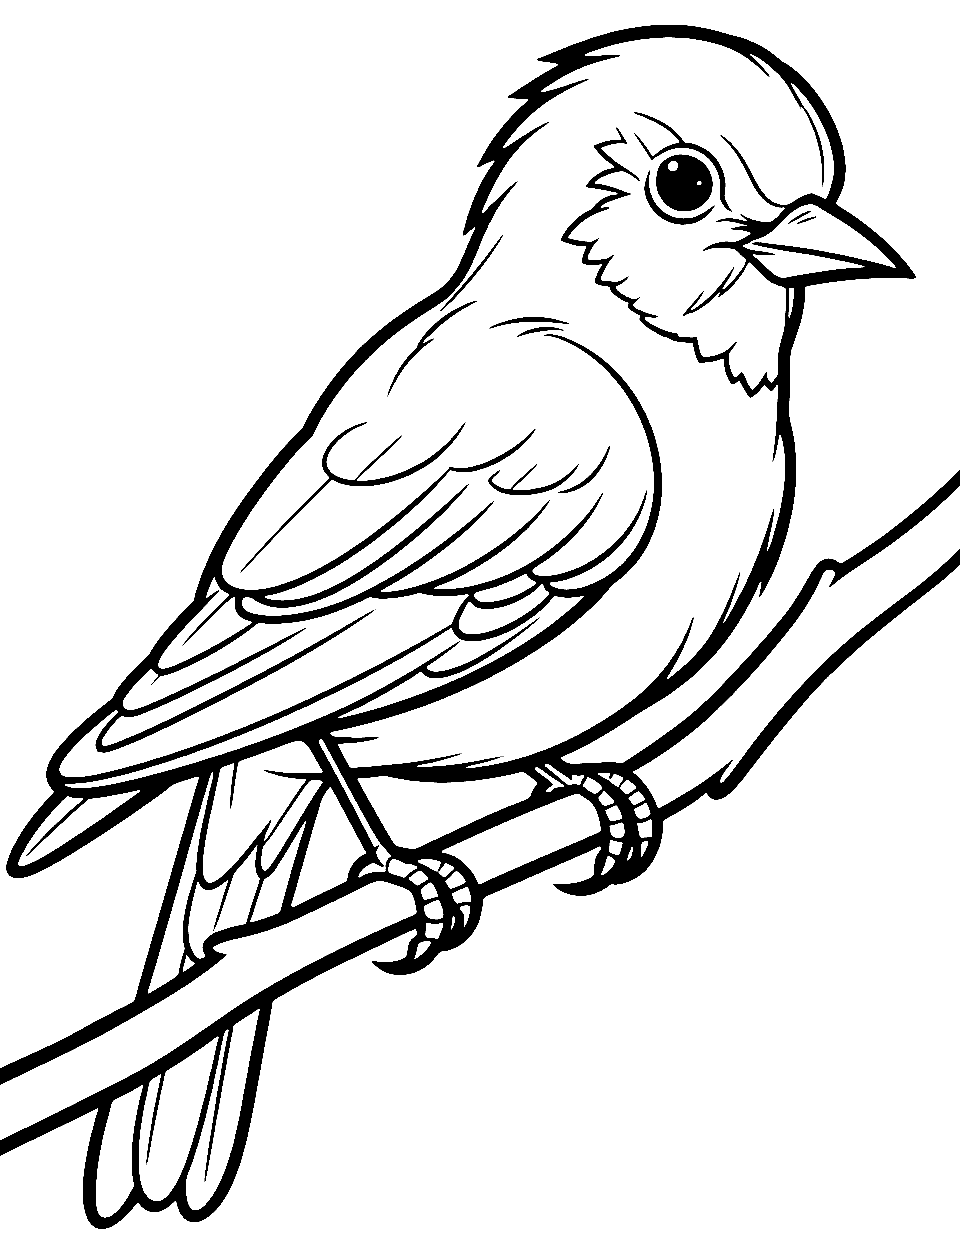 Simple Sparrow Outline Coloring Page - Minimalistic outline of a sparrow, perfect for beginners.